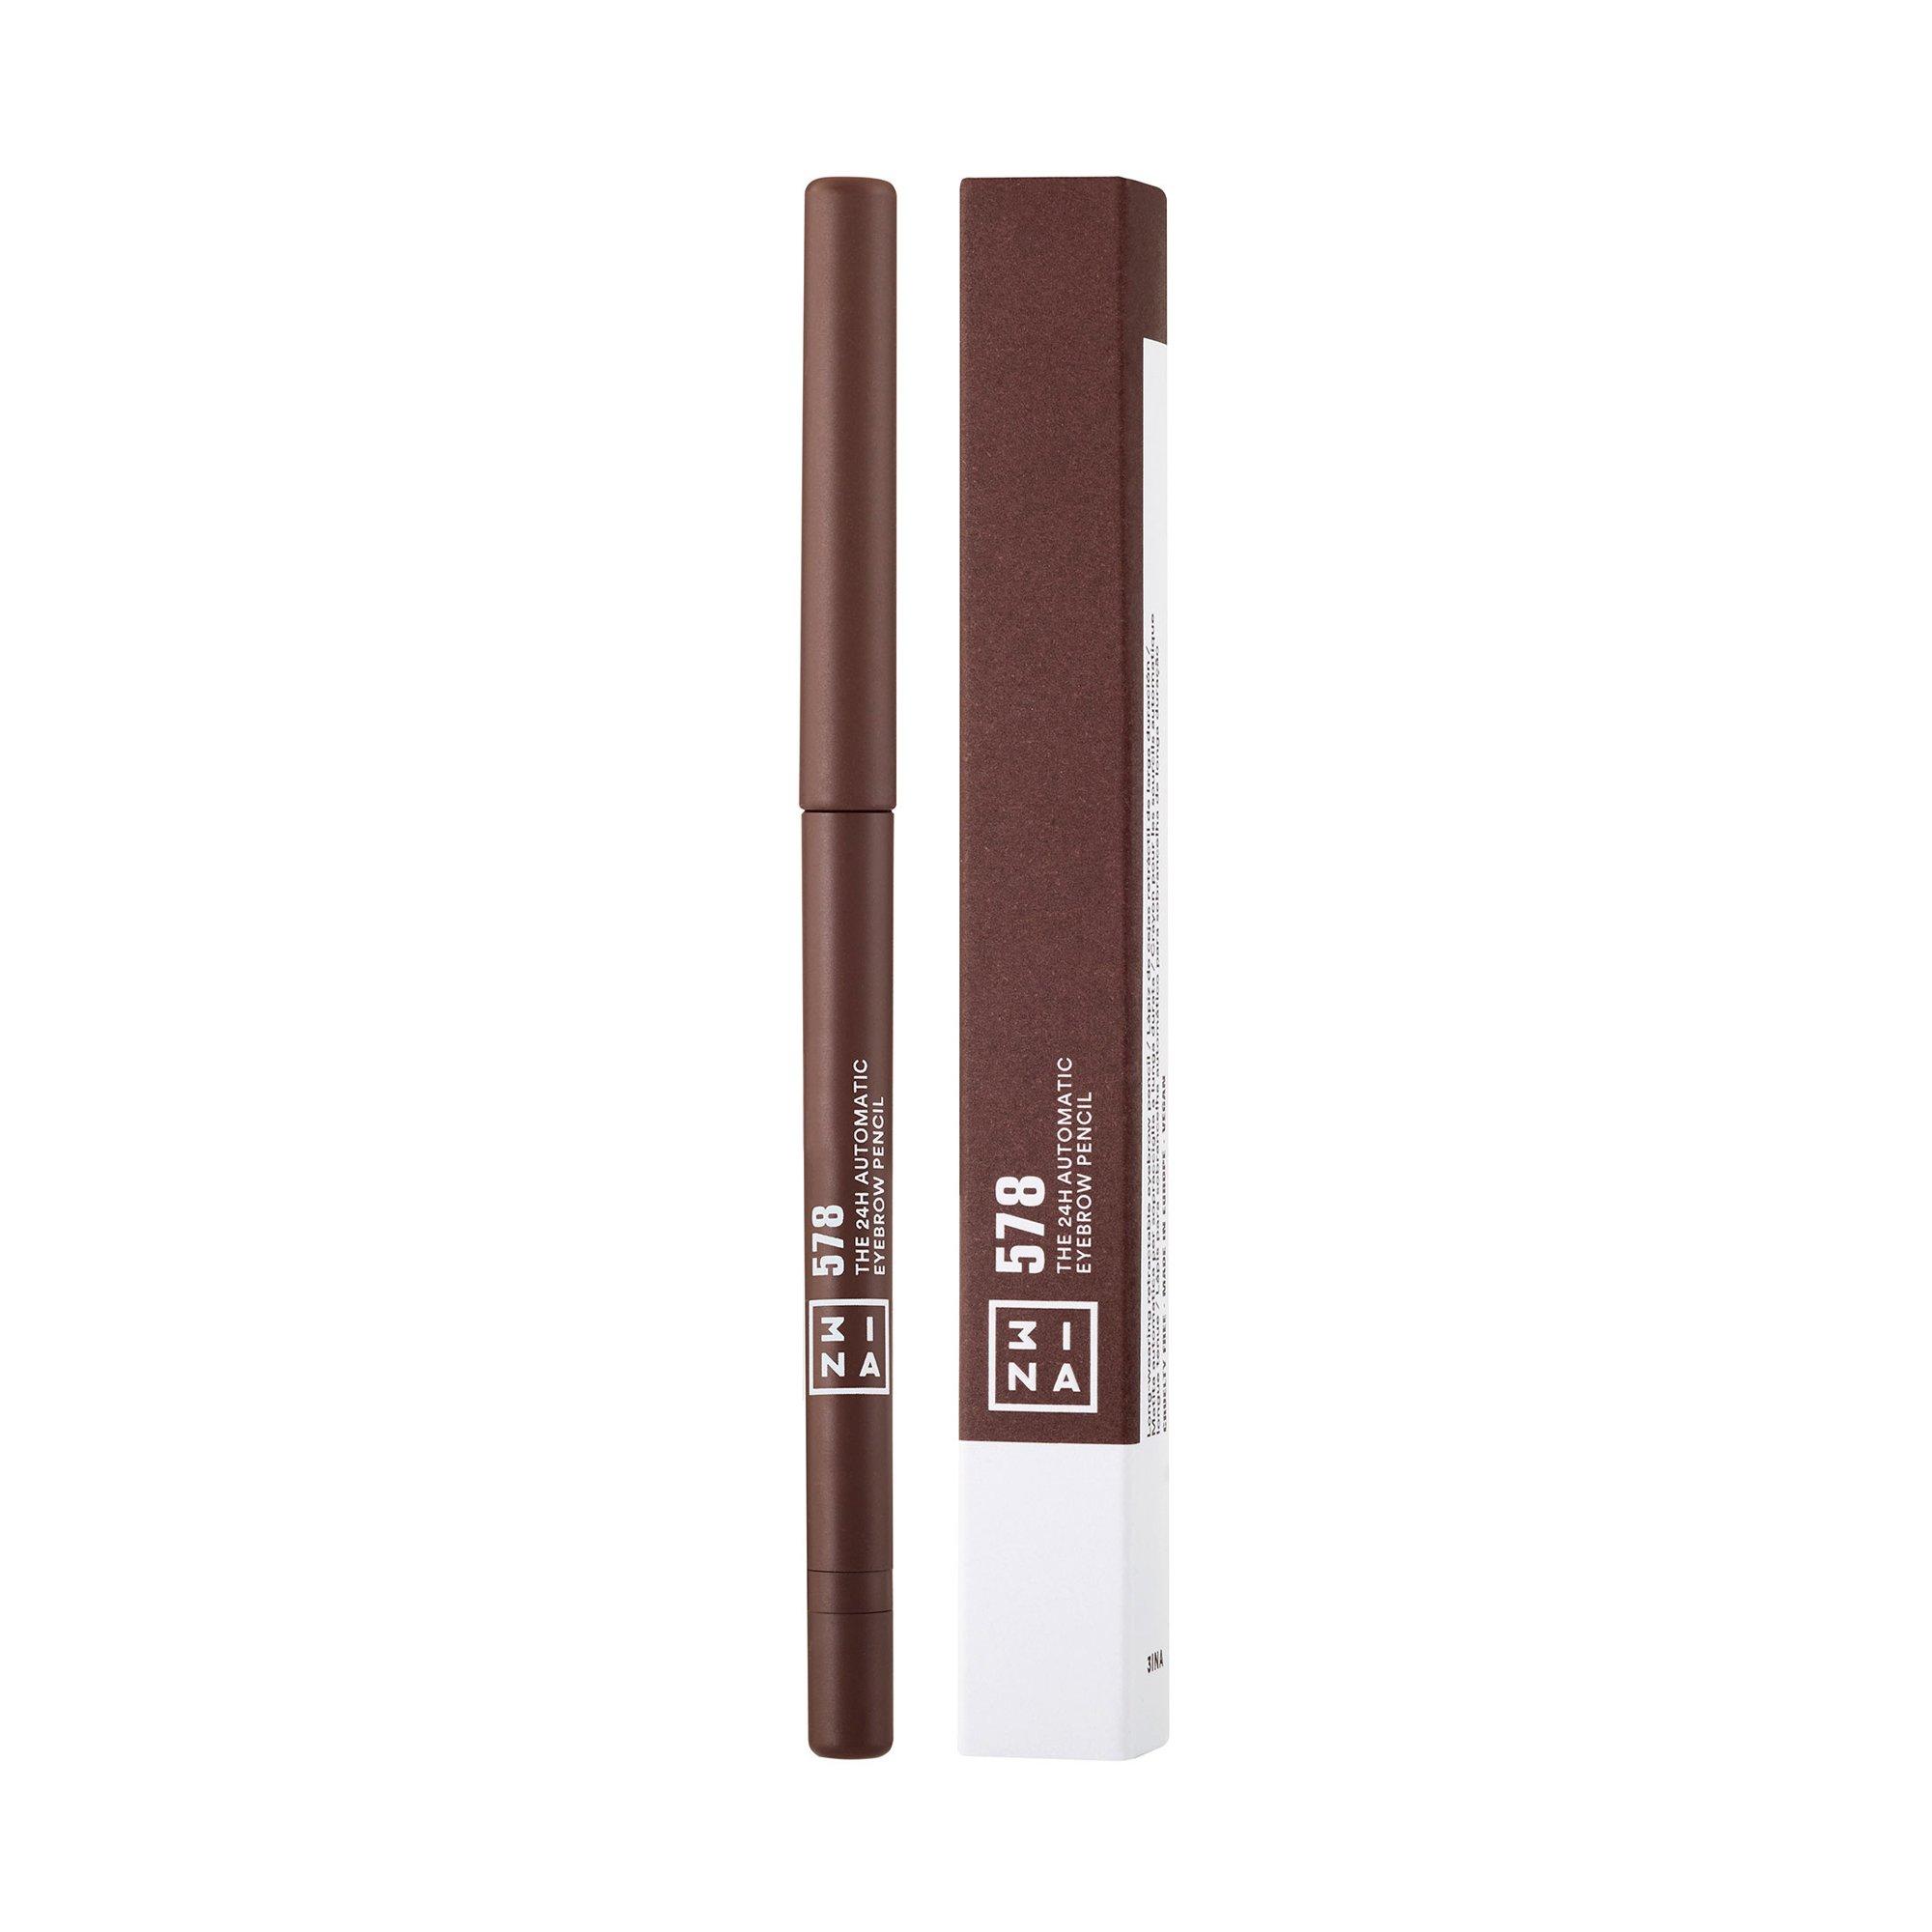 3INA The 24H Automatic Eyebrow Pencil The 24H Automatic Ey 